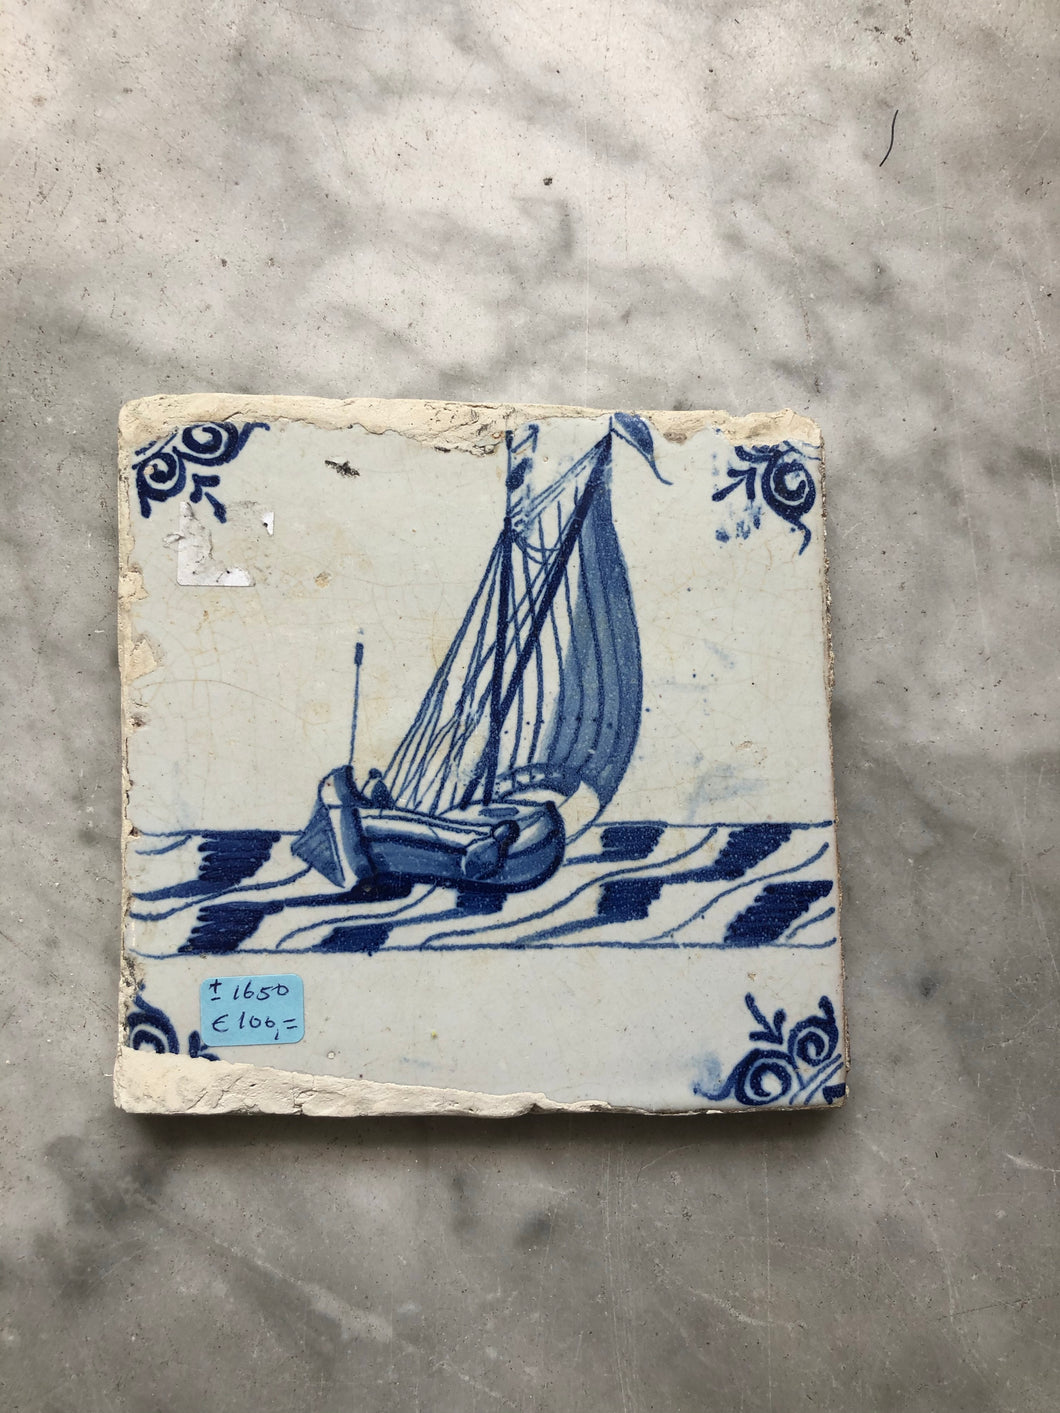 Handpainted dutch delft tile with ship